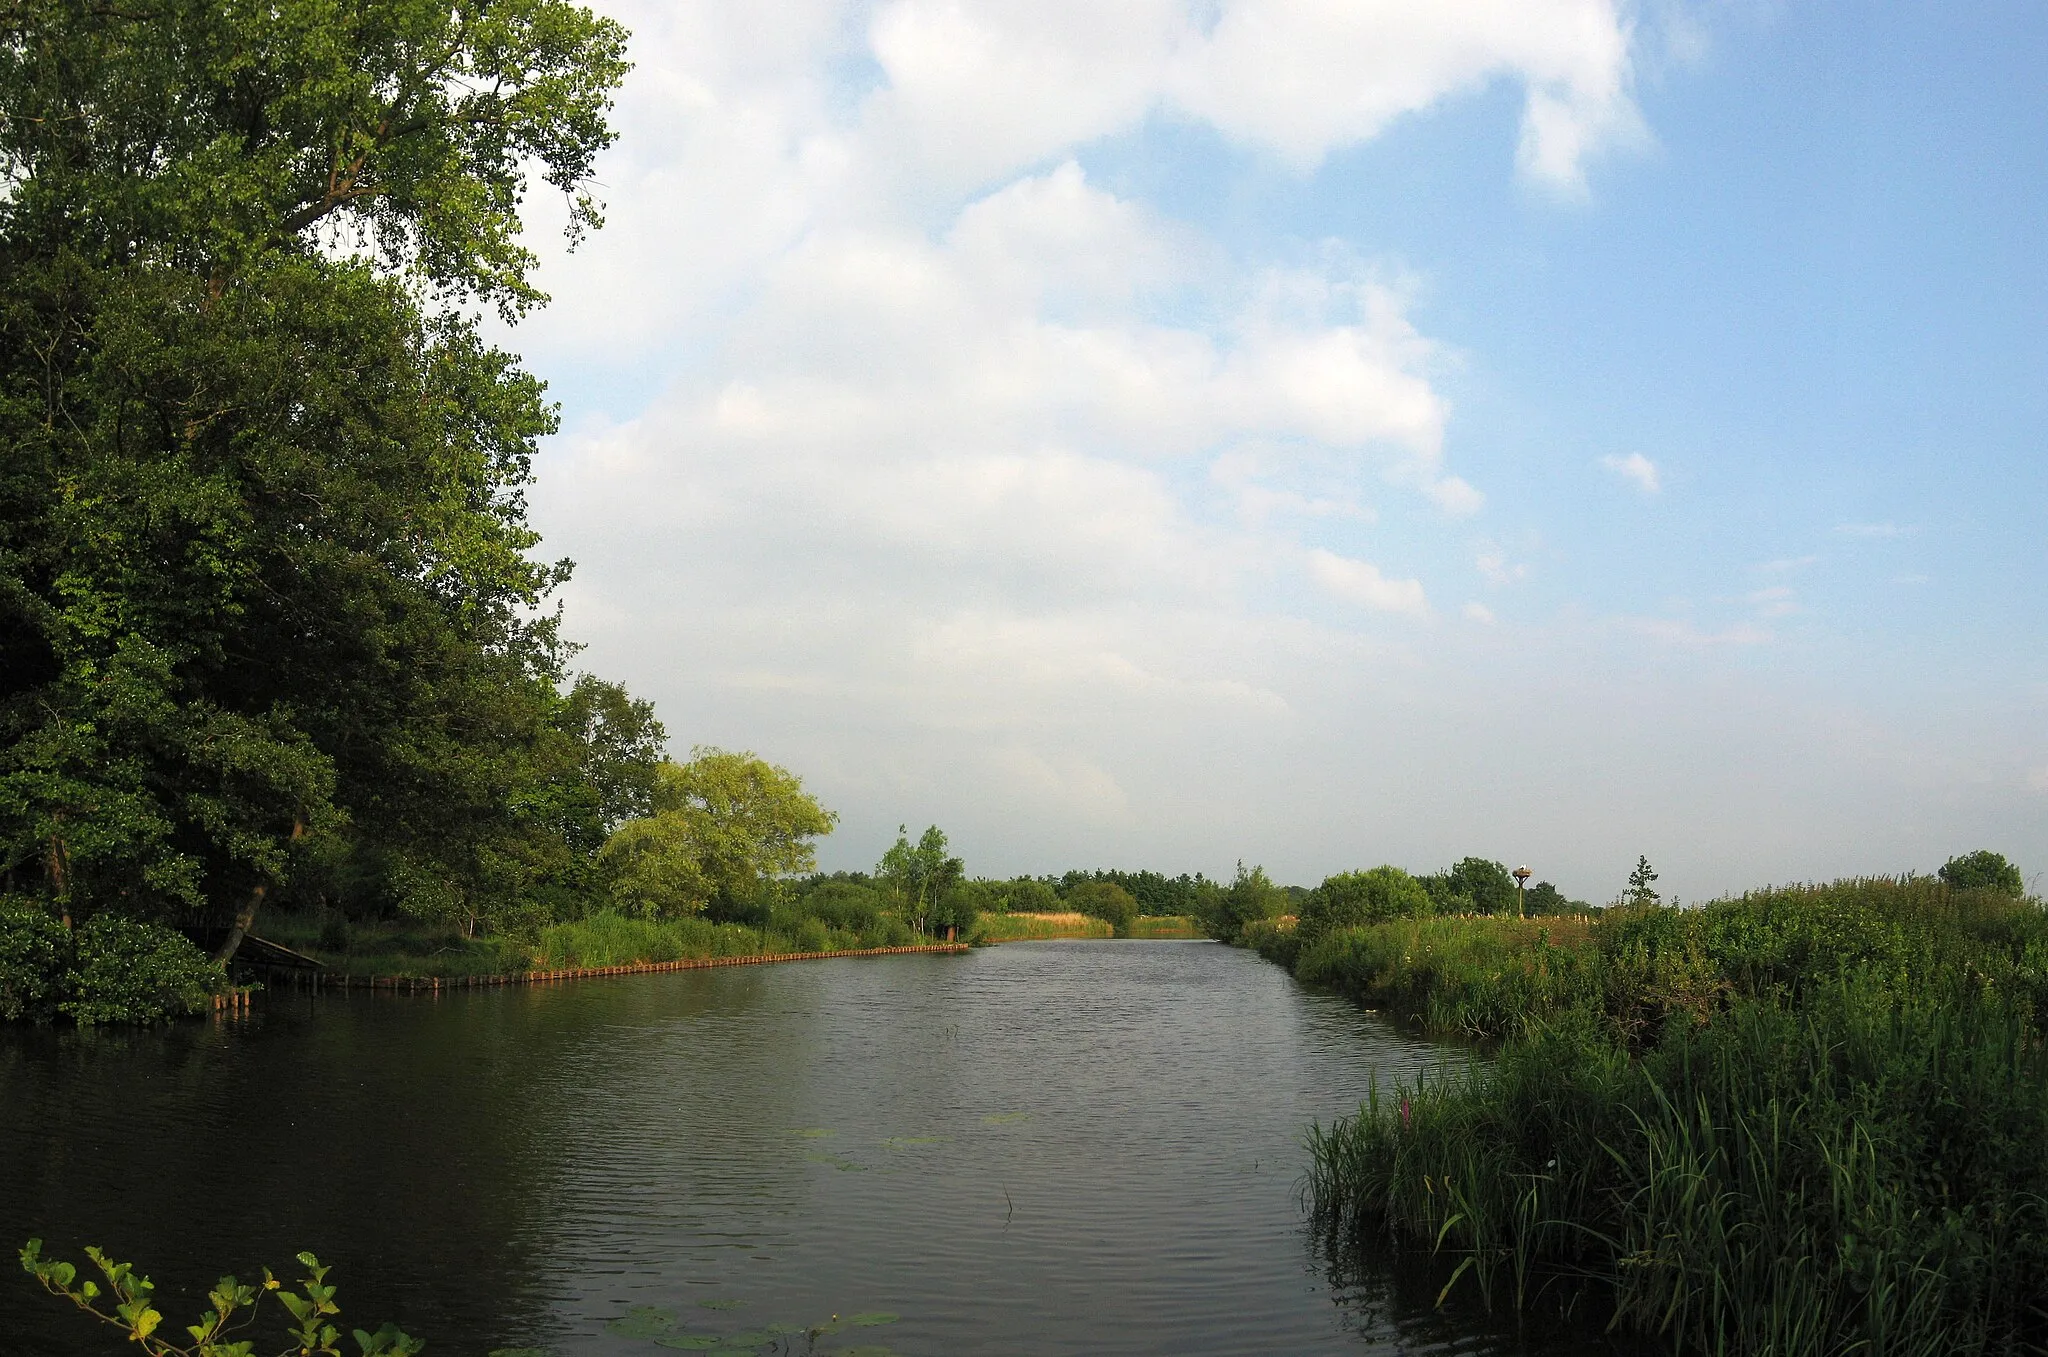 Photo showing: The Drentsche Aa, a river in the Dutch provinces of Drenthe and Groningen.